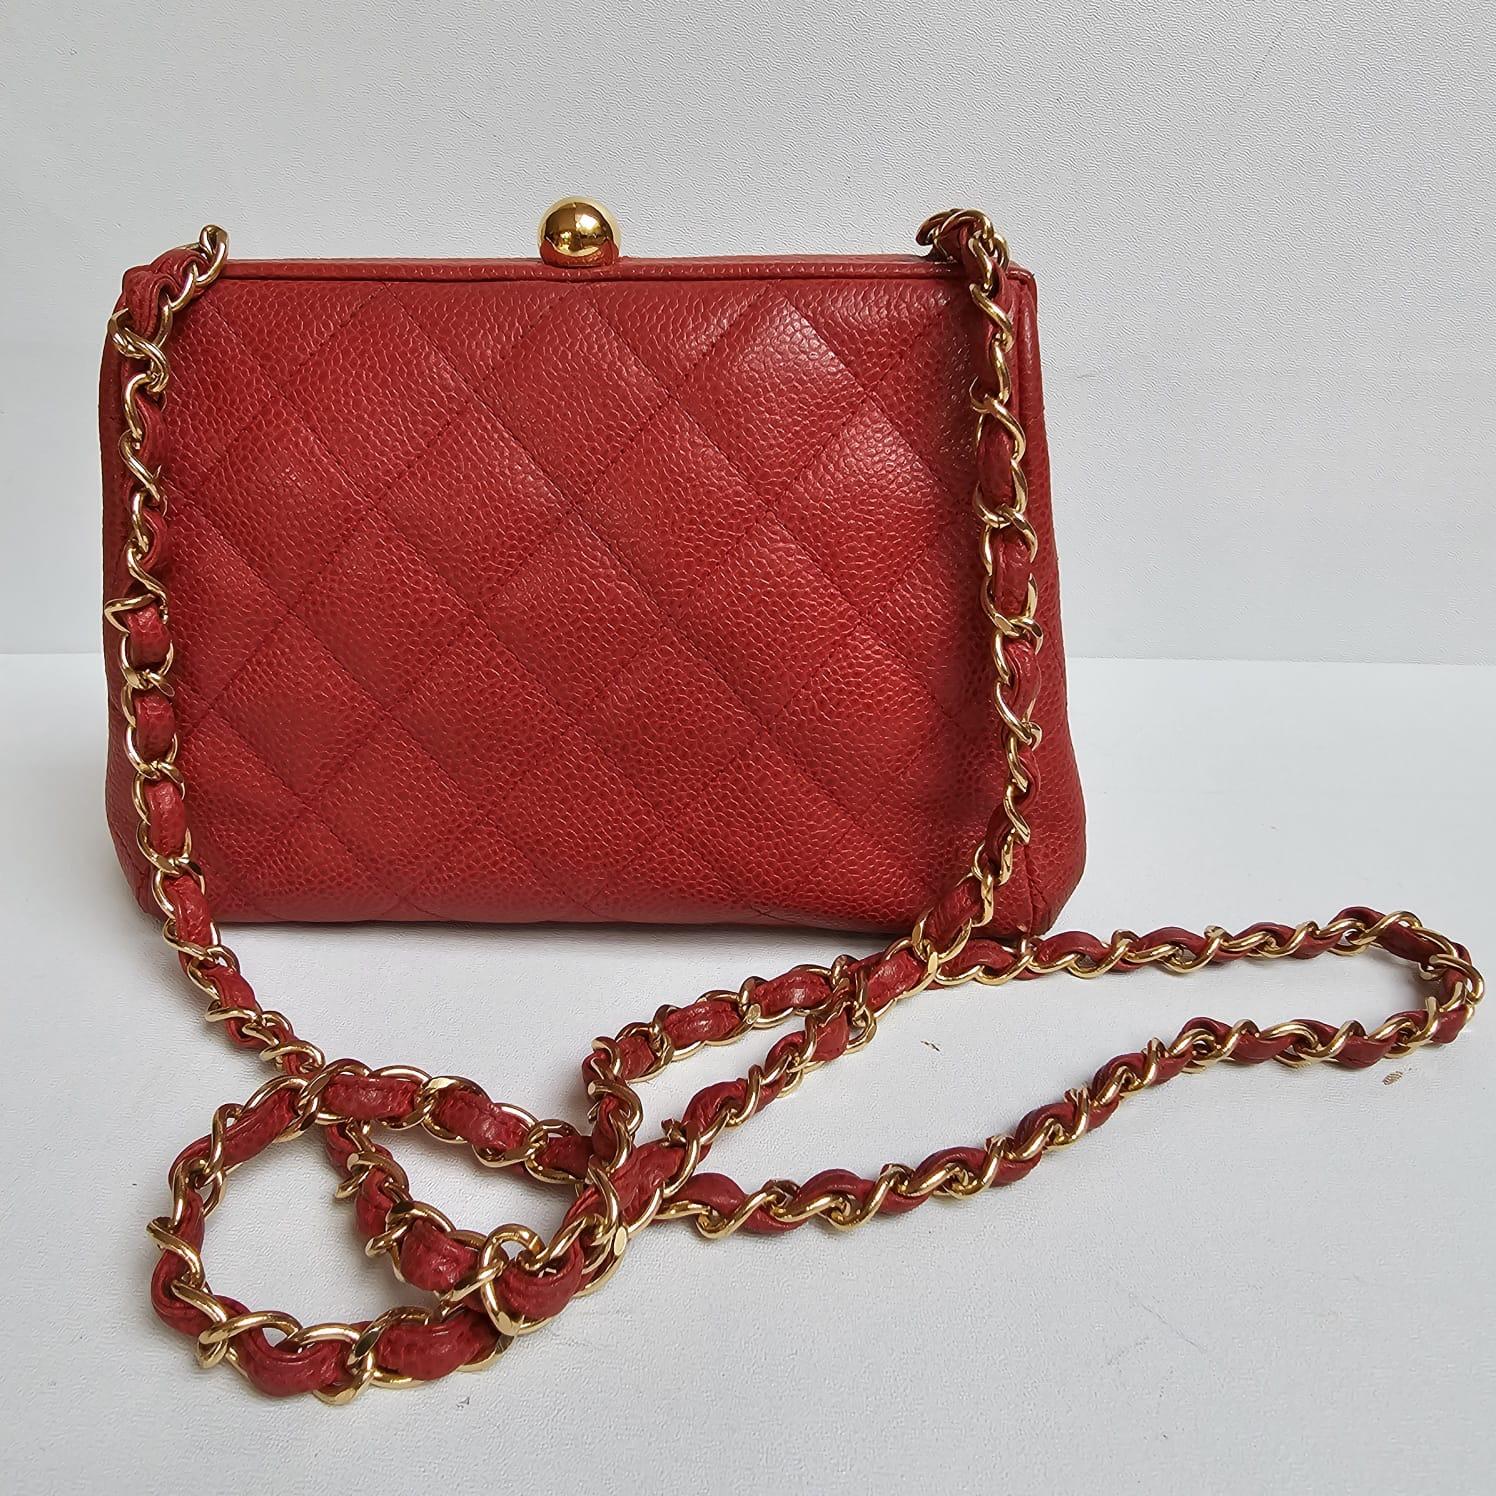 Vintage 1990s Chanel Red Caviar Quilted Mini Purse Sling Bag For Sale 9